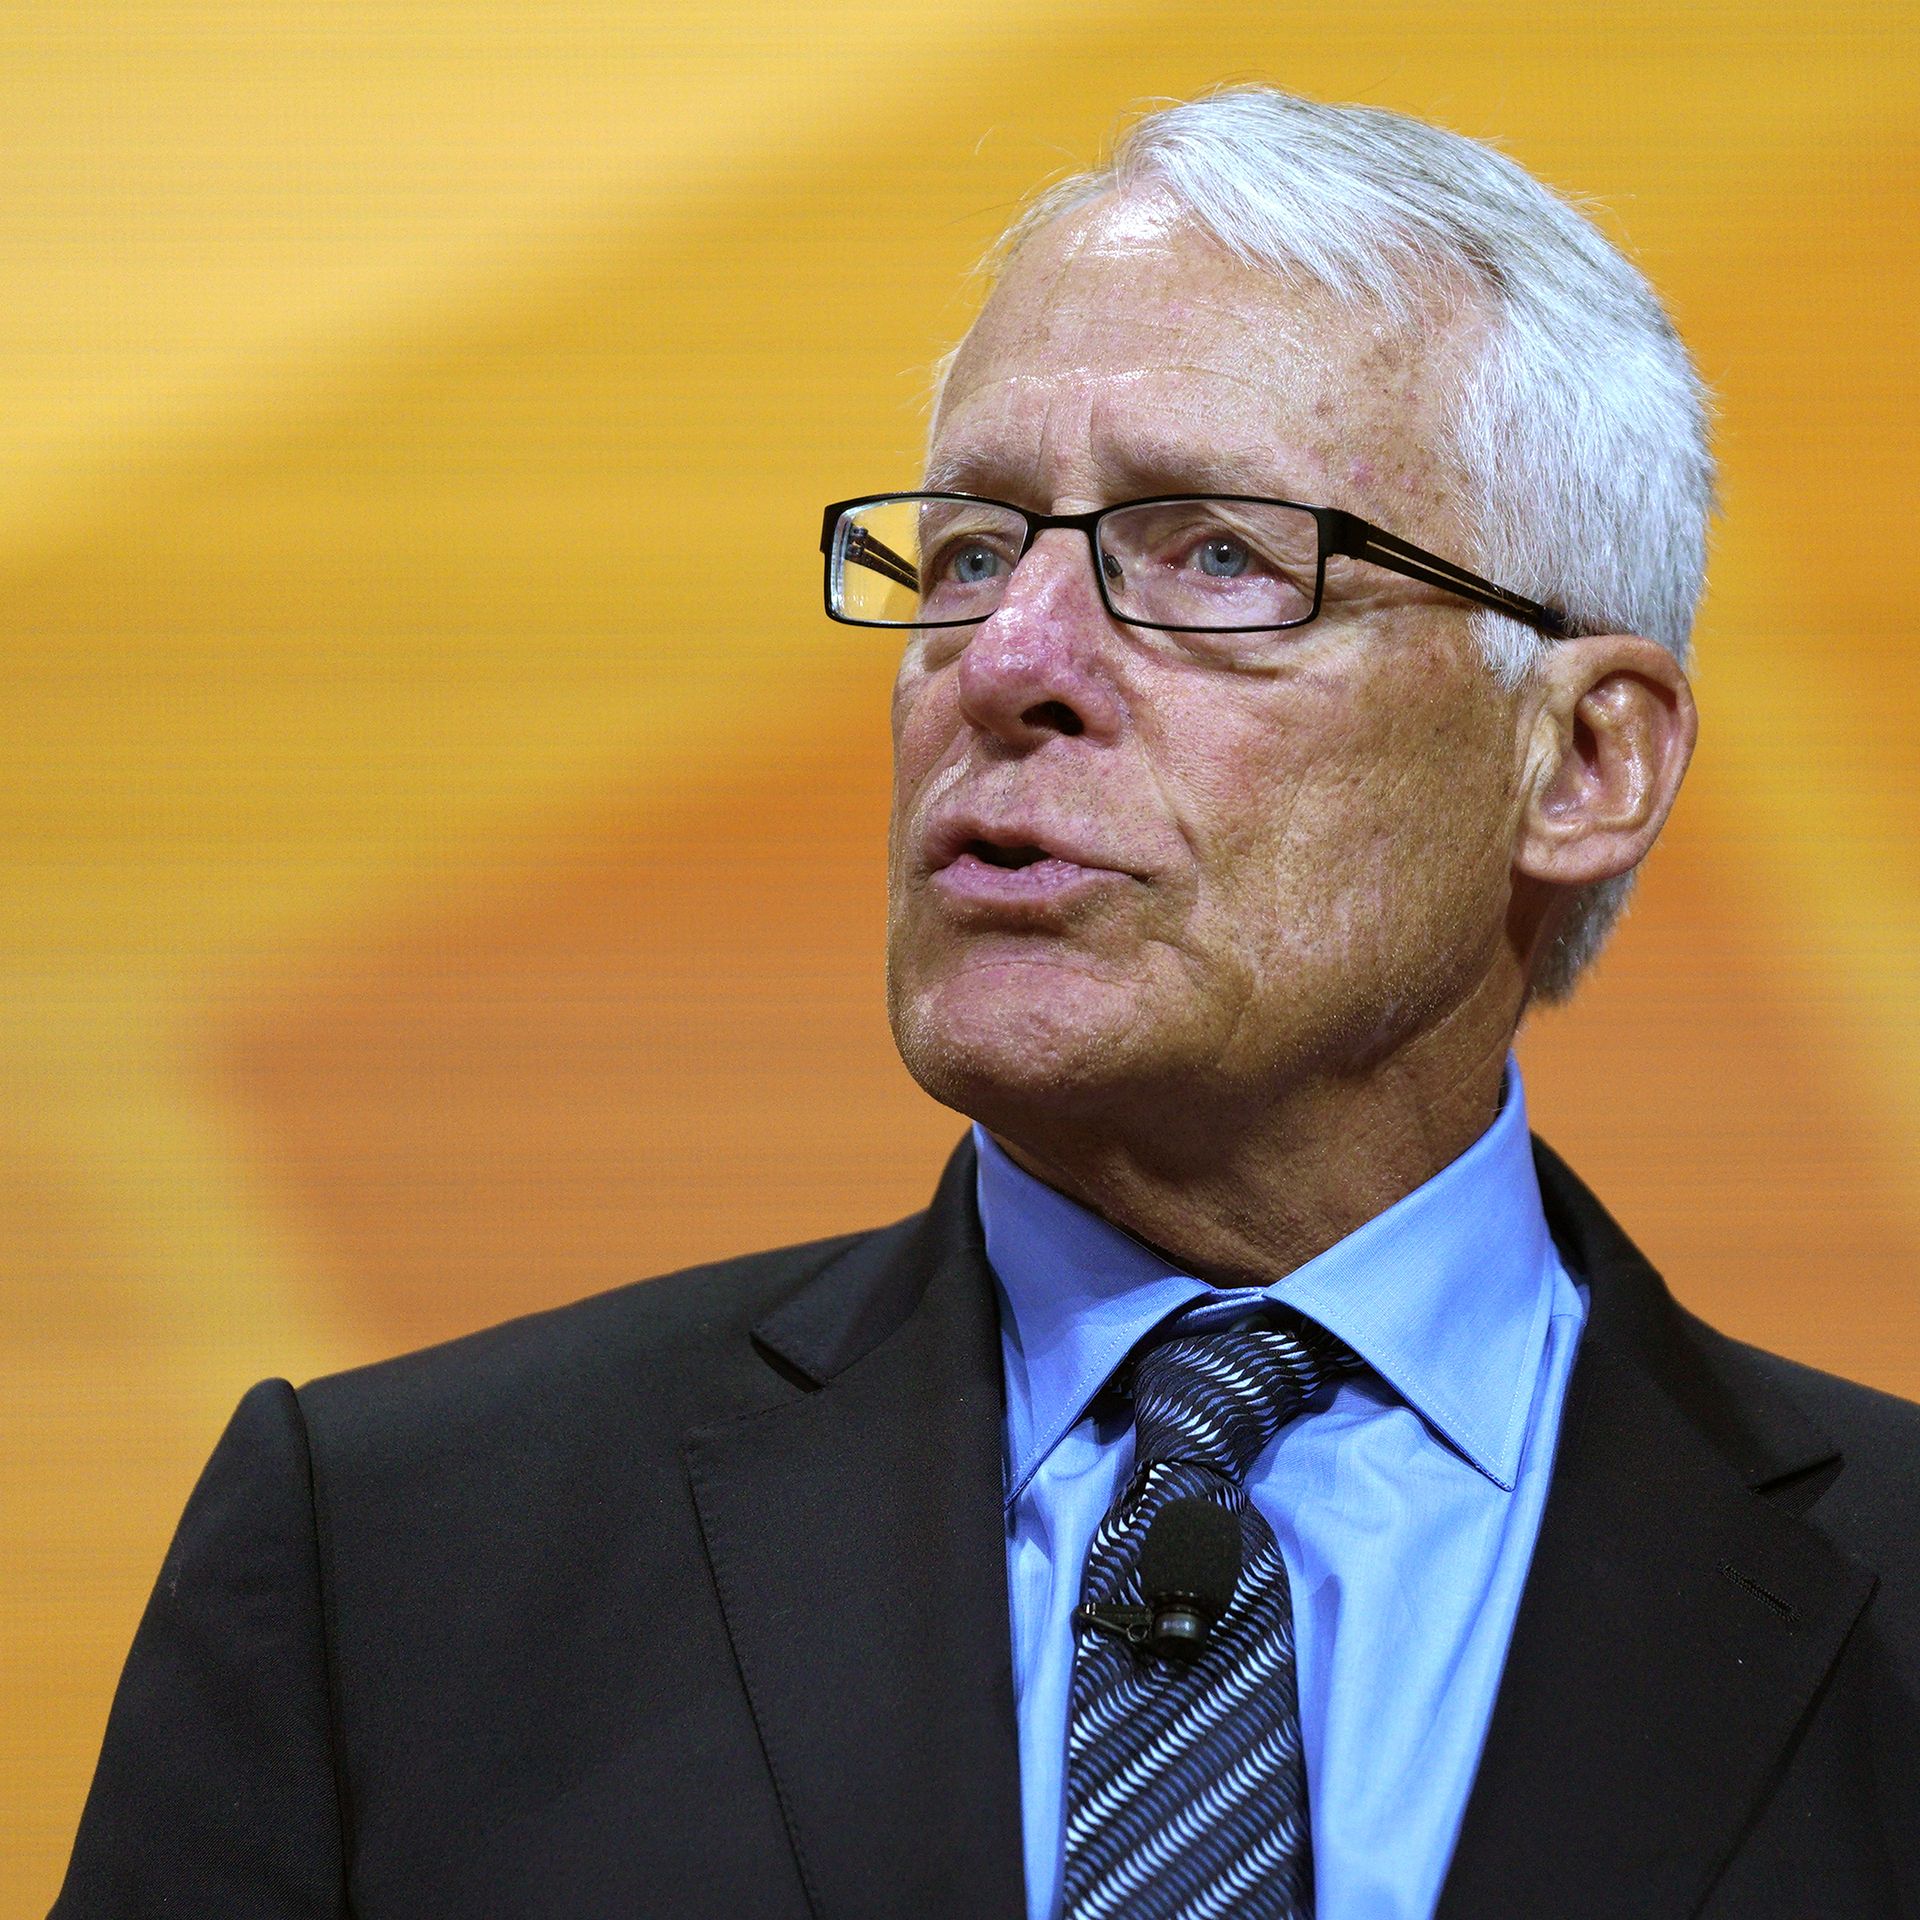 Rob Walton is the lead buyer of the Denver Broncos. Photo: Rick T. Wilking/Getty Images